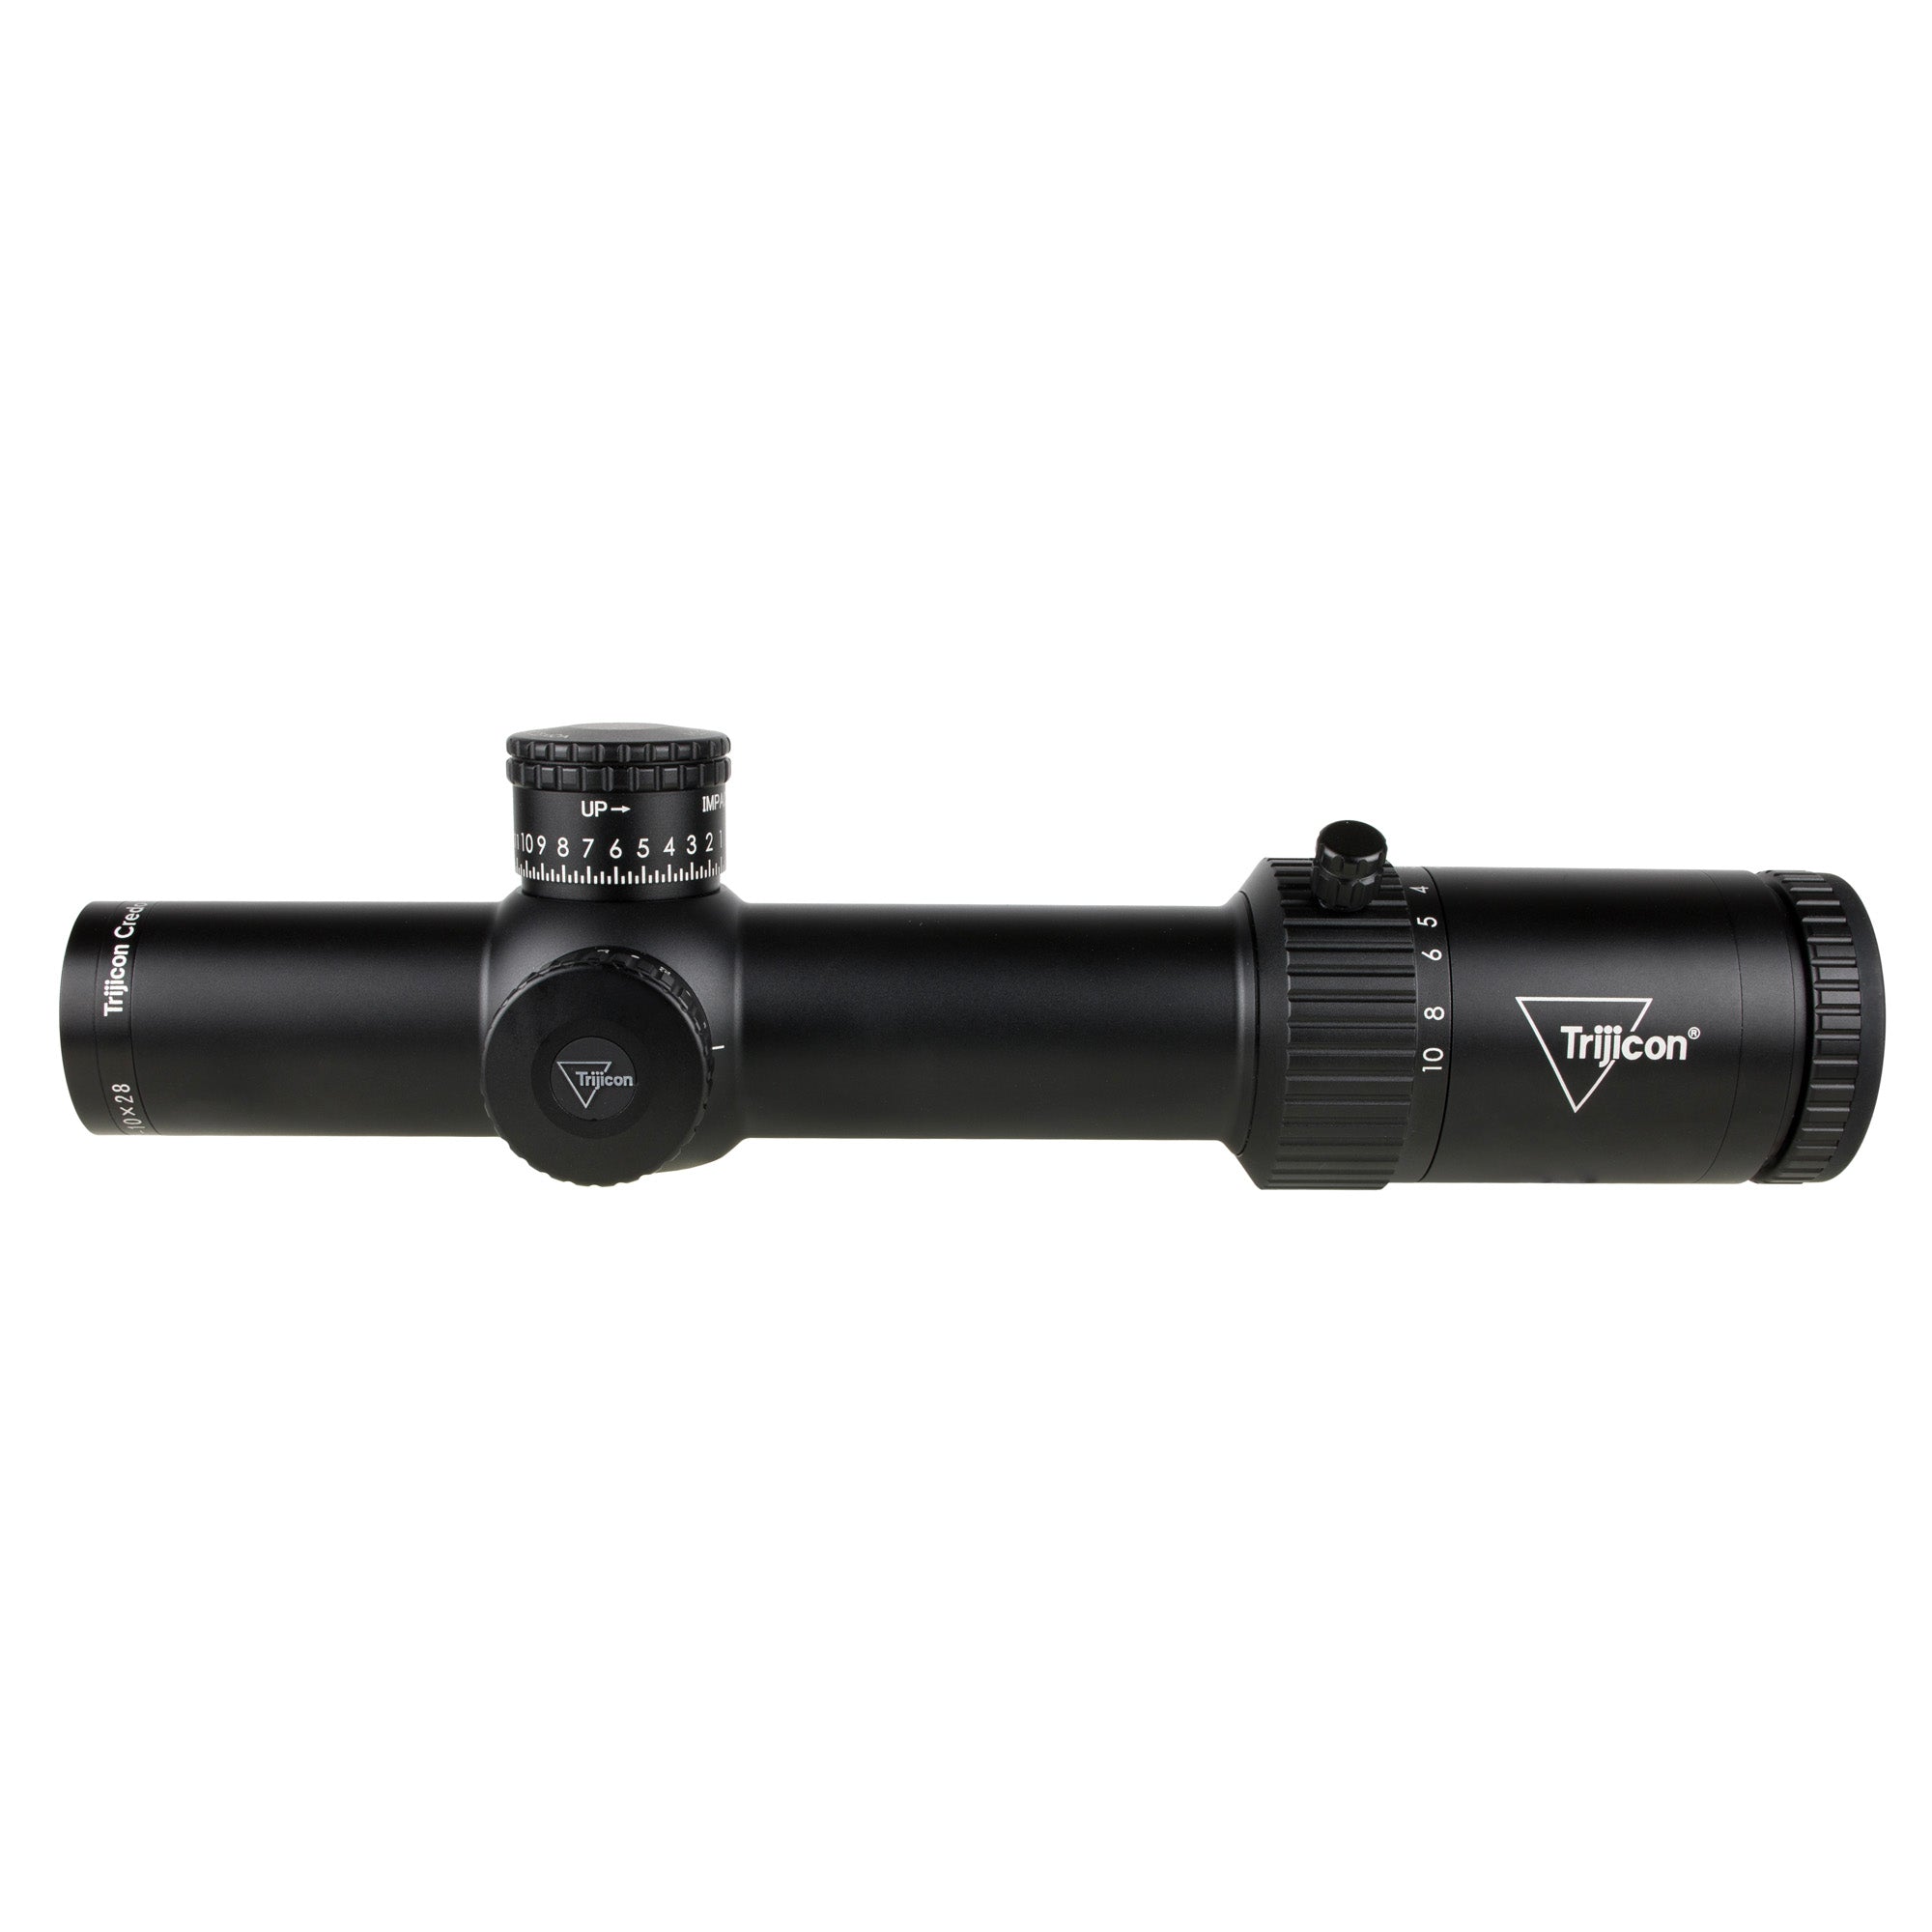 Trijicon Credo HX 1-10x28mm Riflescope with red/green MOA segmented circle reticle, first focal plane, on a matte black finish 34mm tube.